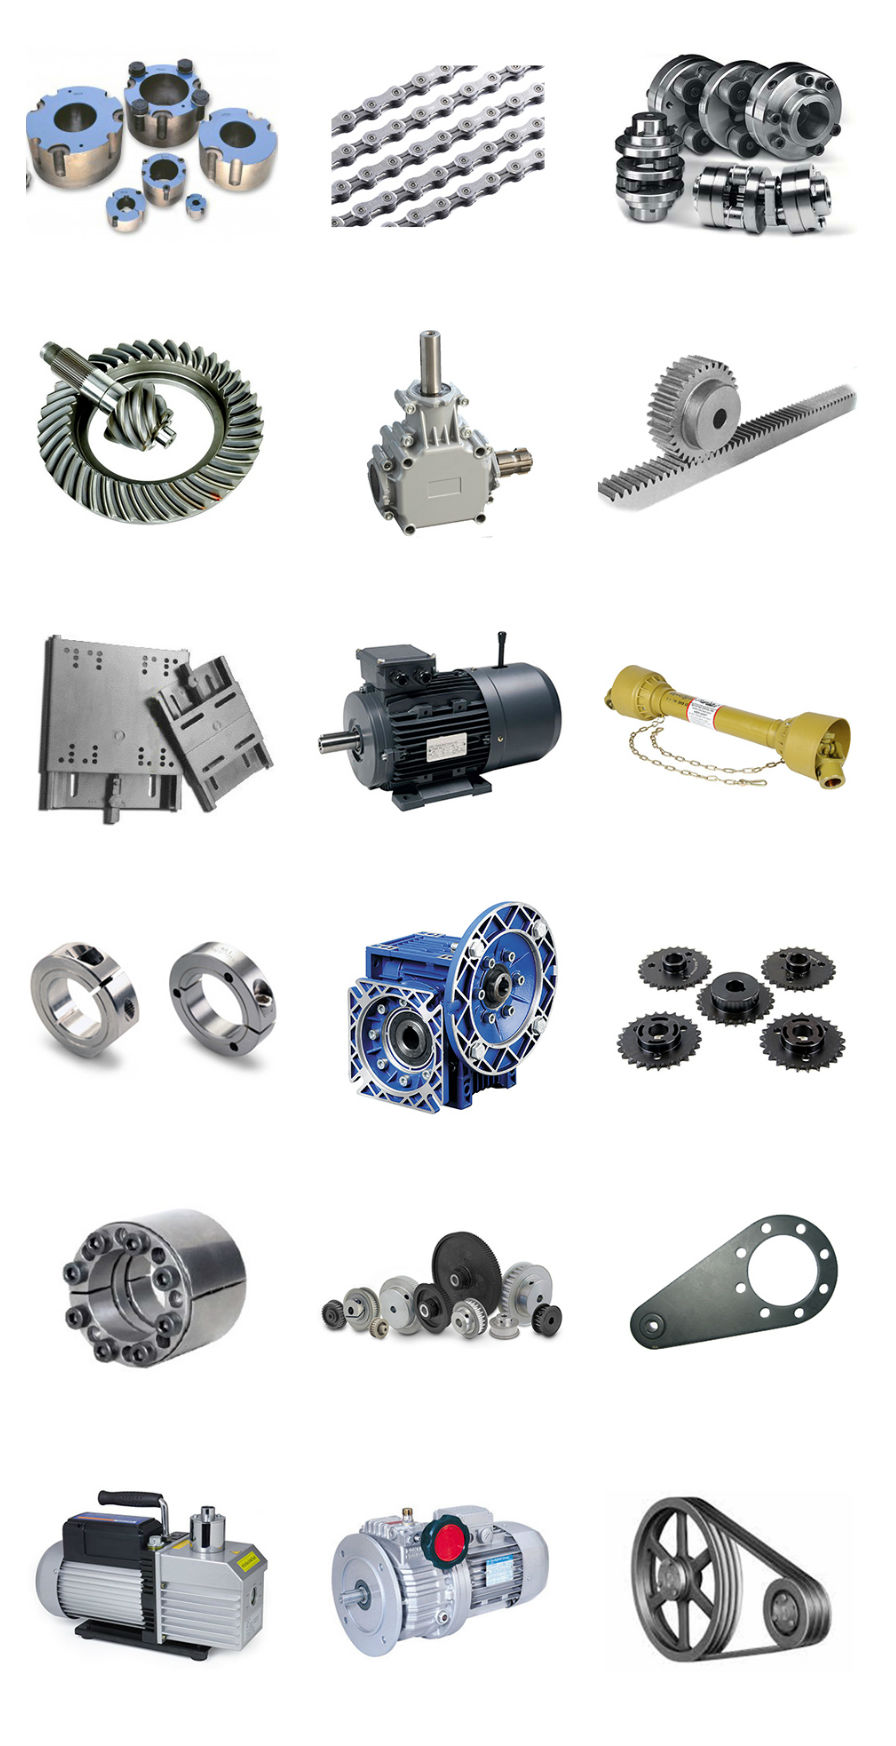 Factory Direct Sell Small Gearbox for Agriculture Machinery